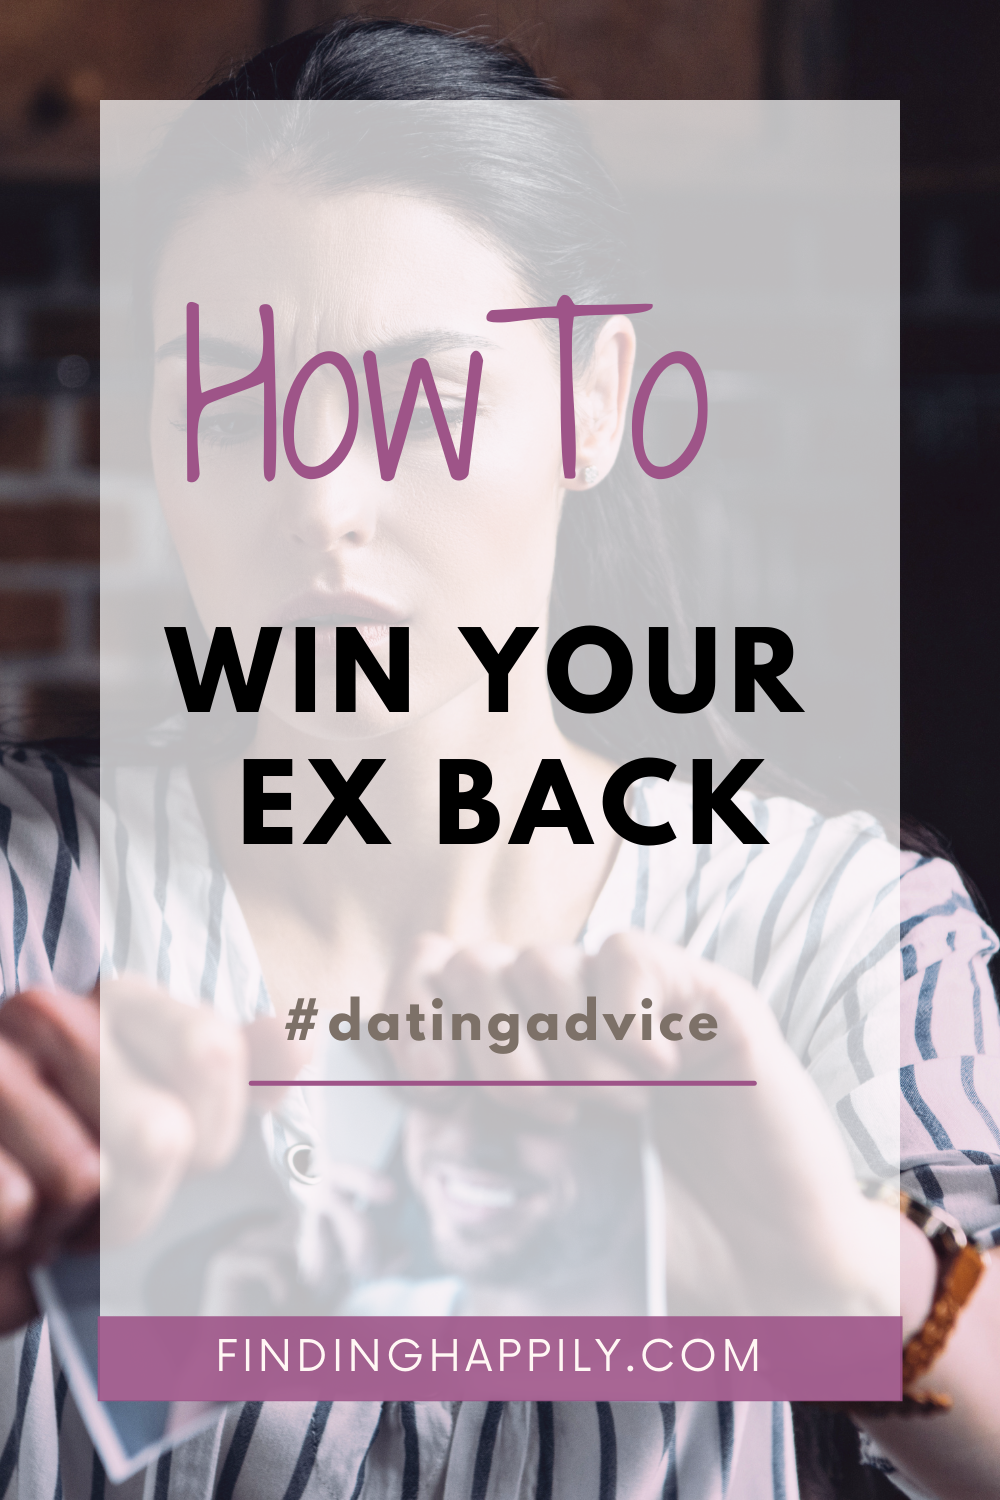 can you win your ex back